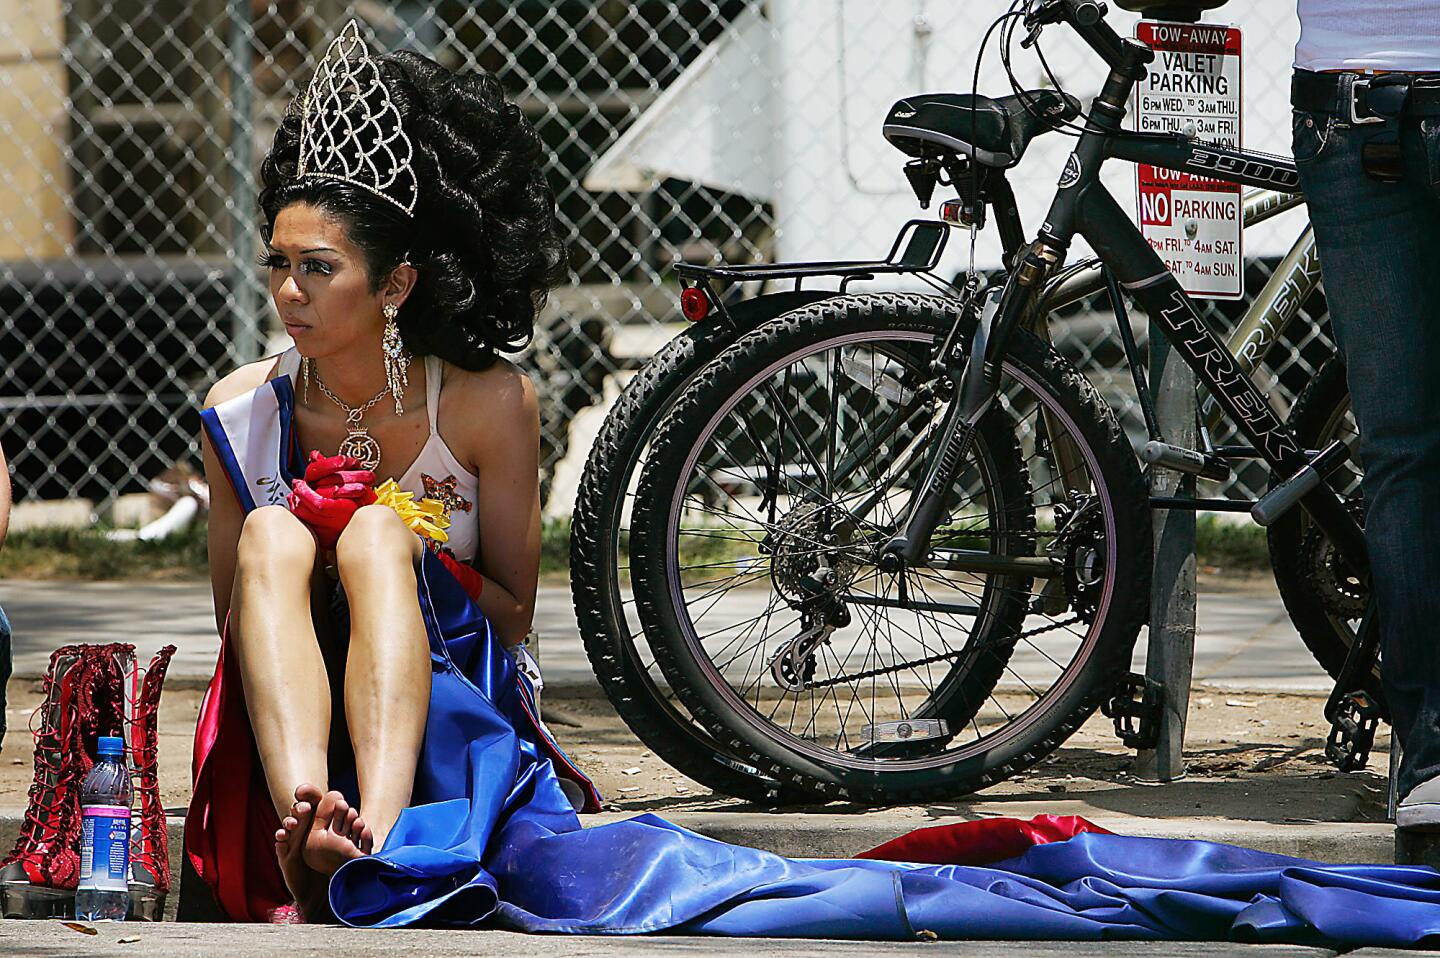 Paris Queen, Miss Gay Philippines International, rests his feet after marching with thousands of revelers in the 37th annual L.A. Pride Parade Sunday in West Hollywood. The festive street scene celebrates gay, lesbian, bisexual and transgender lifestyles.